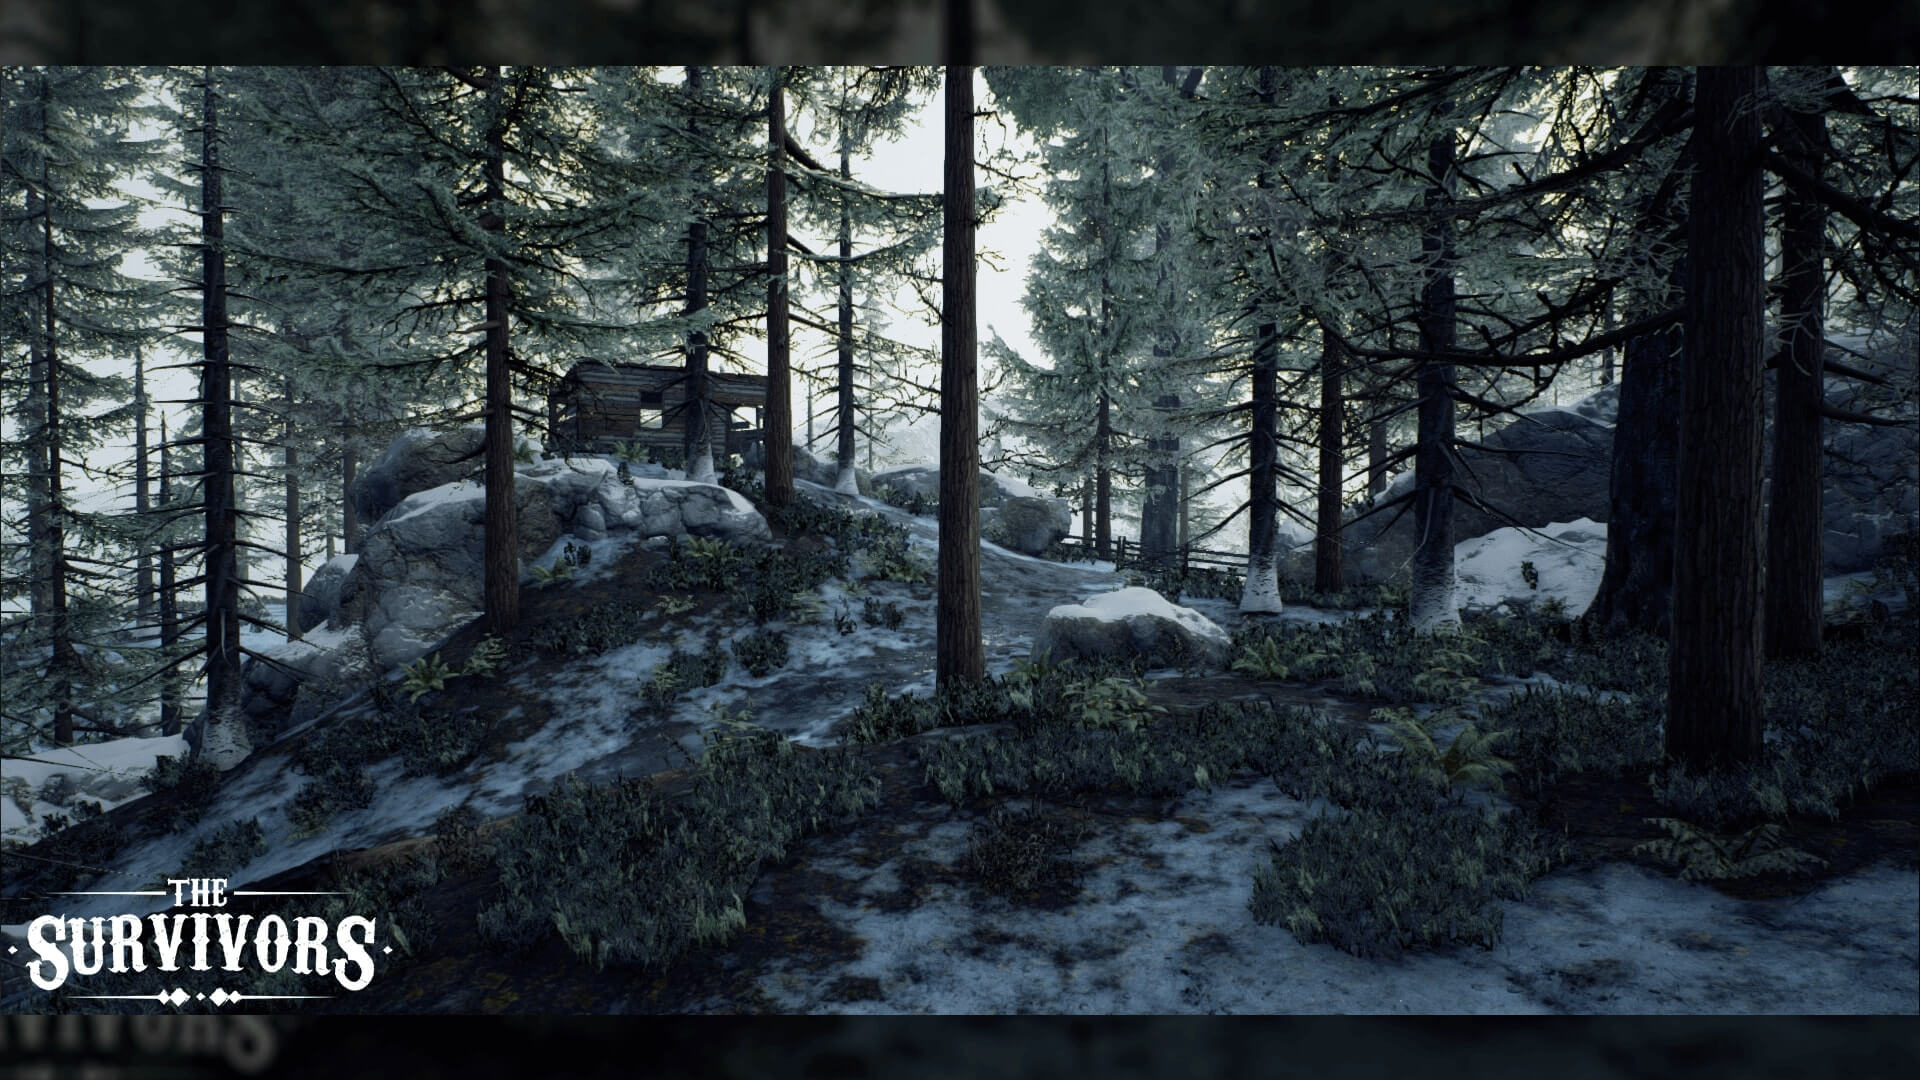 A screenshot of the environment in The Survivors, with snow, trees, and a hut on a hill.